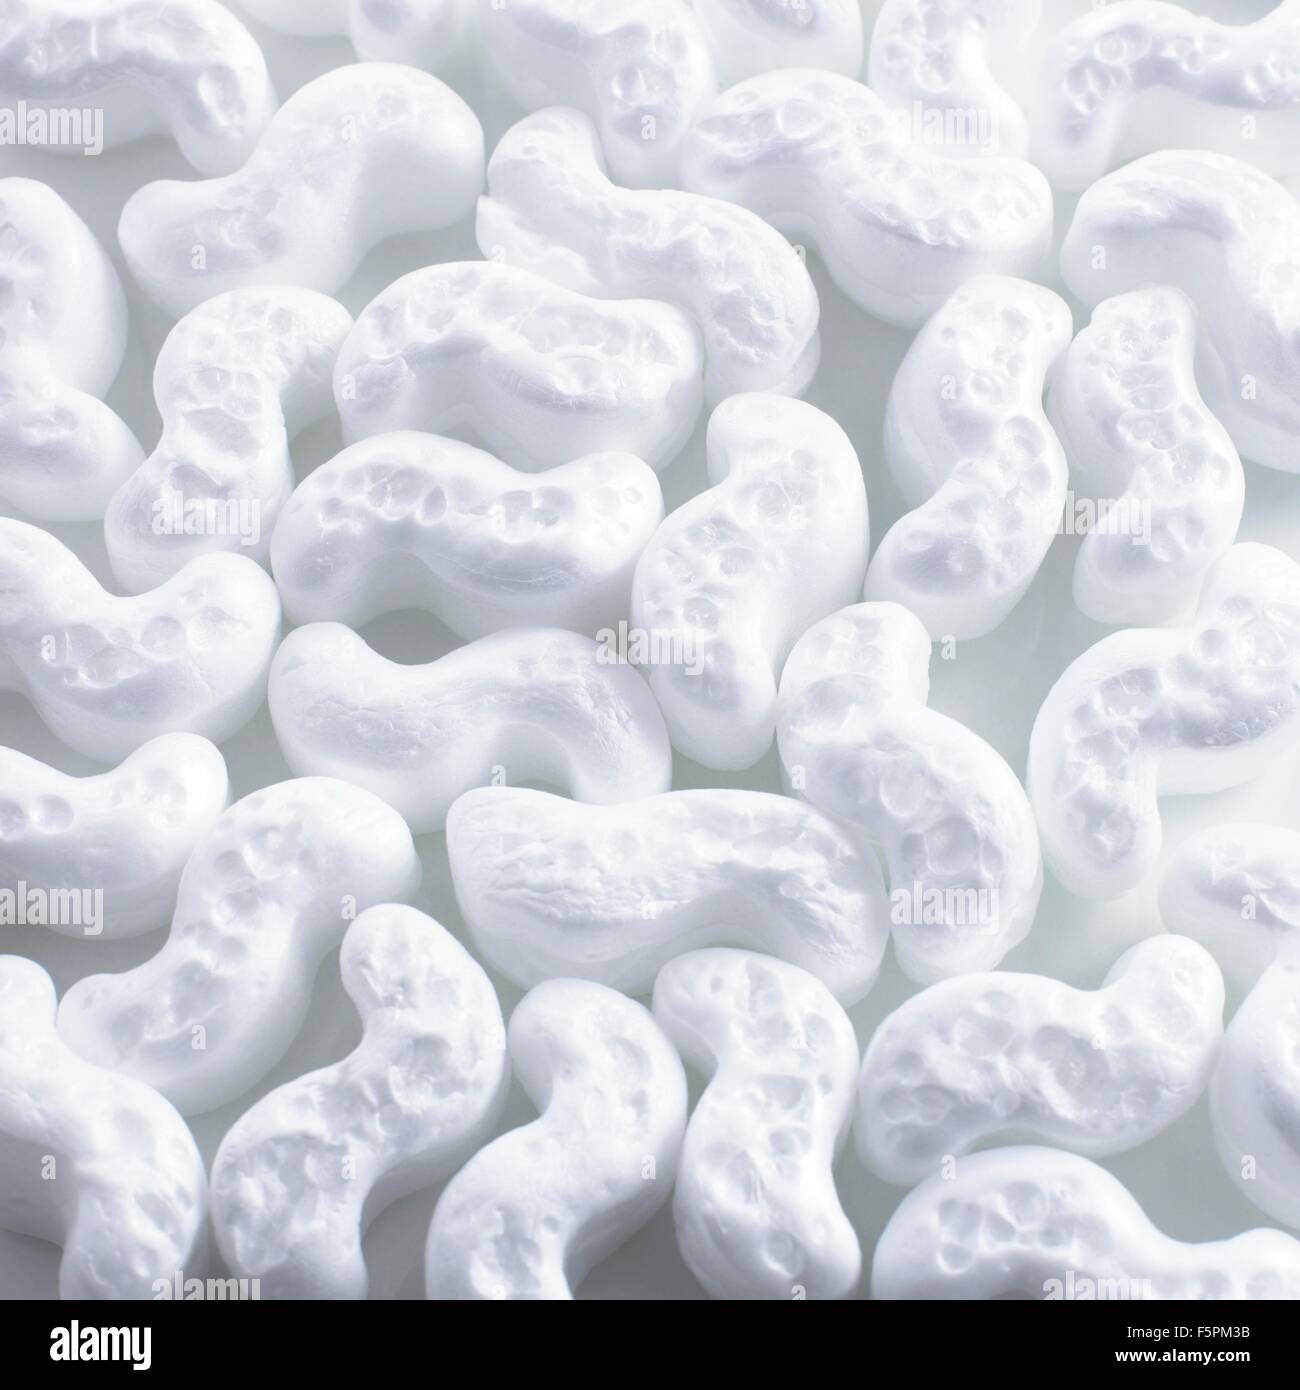 Polystyrene packaging material. Stock Photo